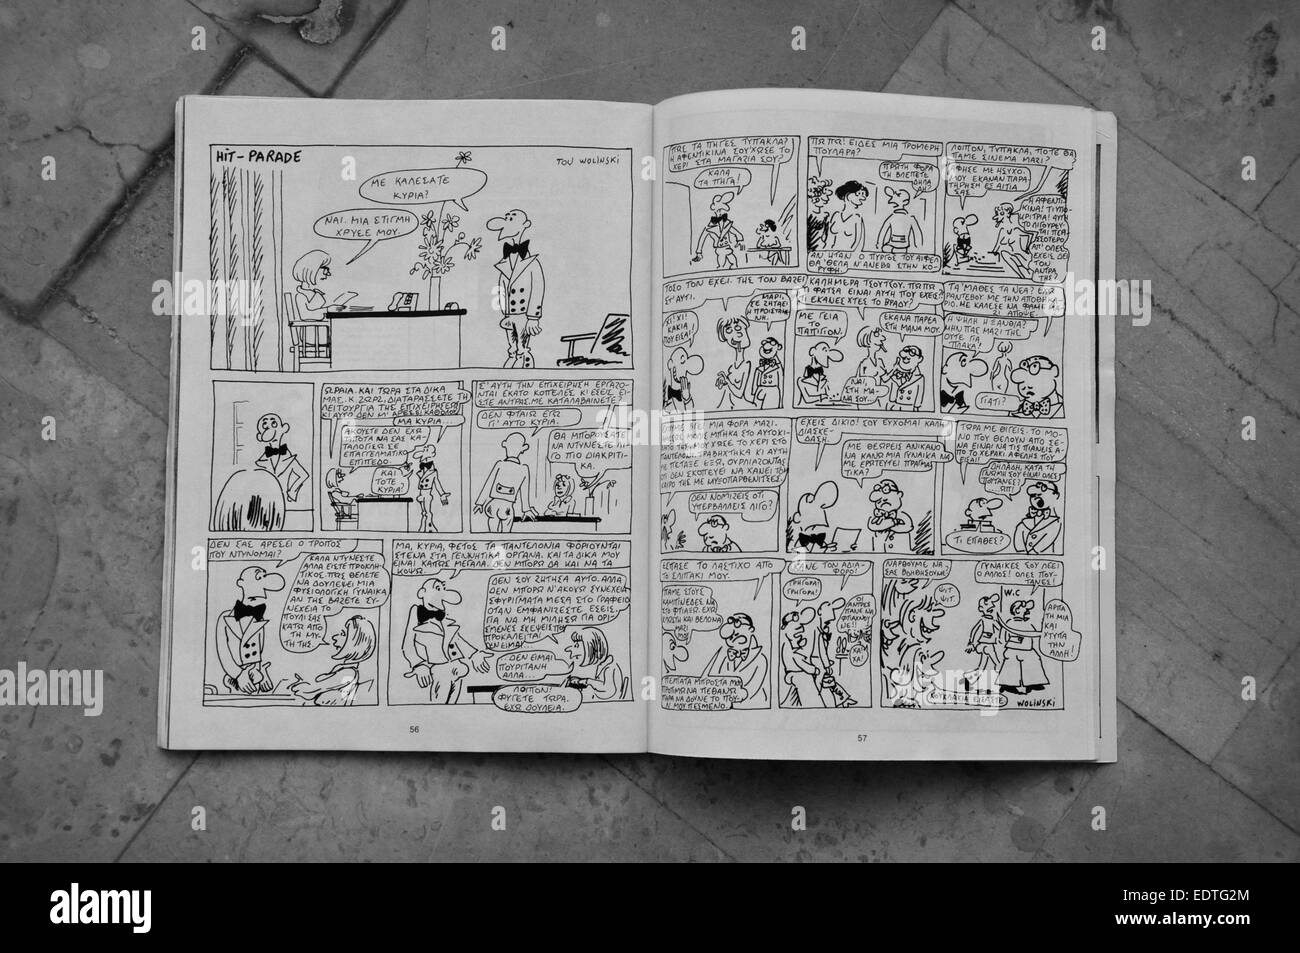 Comic book by cartoonist Georges Wolinski a victim of the terrorist attack at the office of Charlie Hebdo satirical magazine. Stock Photo